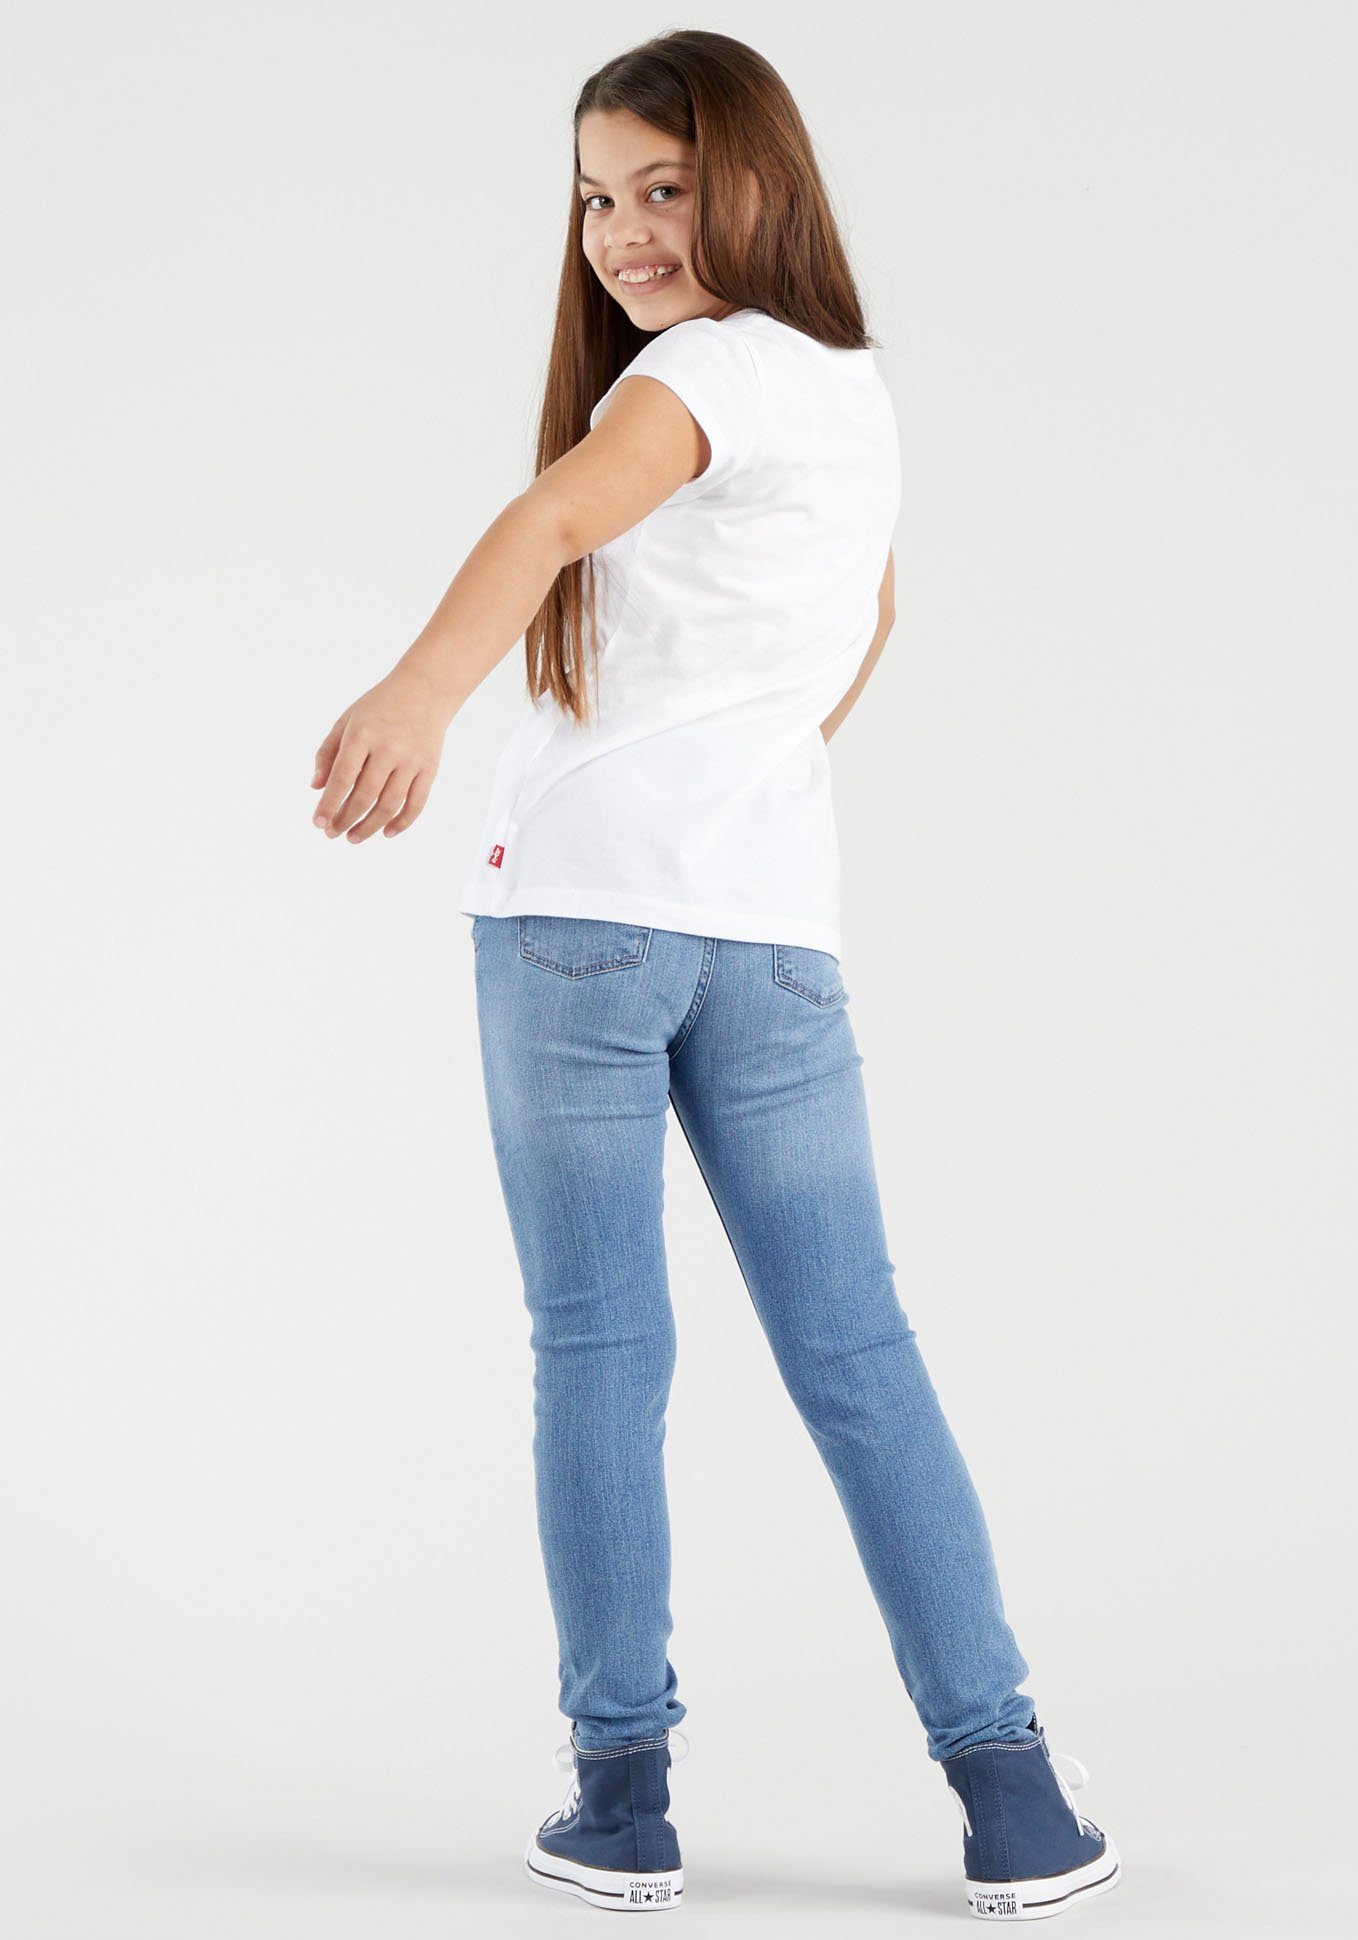 for blue used HIGH Stretch-Jeans GIRLS 720™ SUPER Levi's® Kids light SKINNY RISE